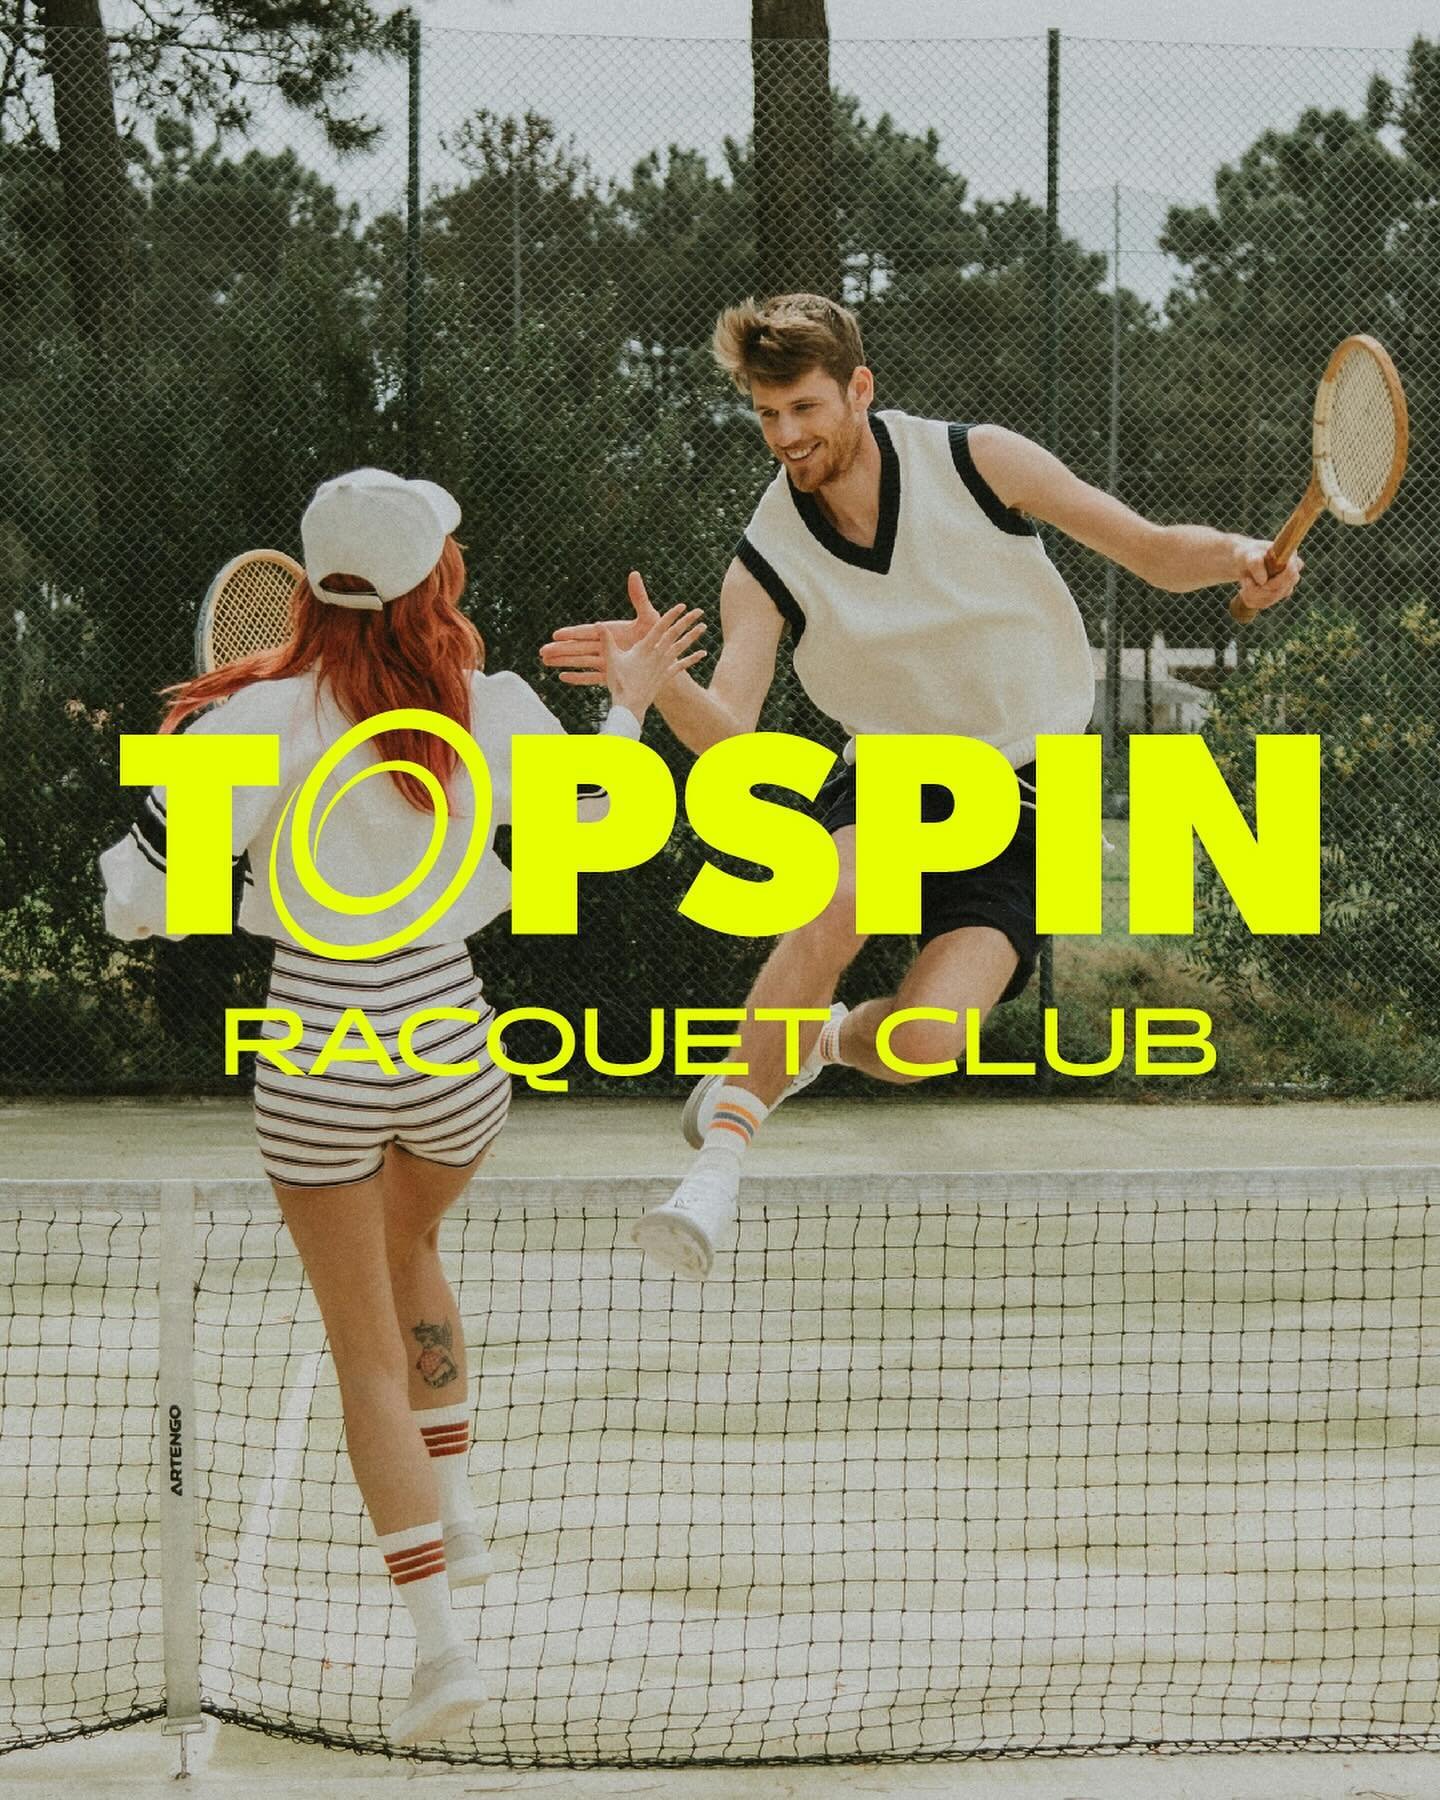 Sneak peek at the branding I&rsquo;m working on for Topspin. 

This week&rsquo;s brief from @briefblvd / @studioshelbs 🎾 

I wanted to make a strong but simple logo and have fun with some neon colors with a sporty flair. 

#designchallenge #passionp